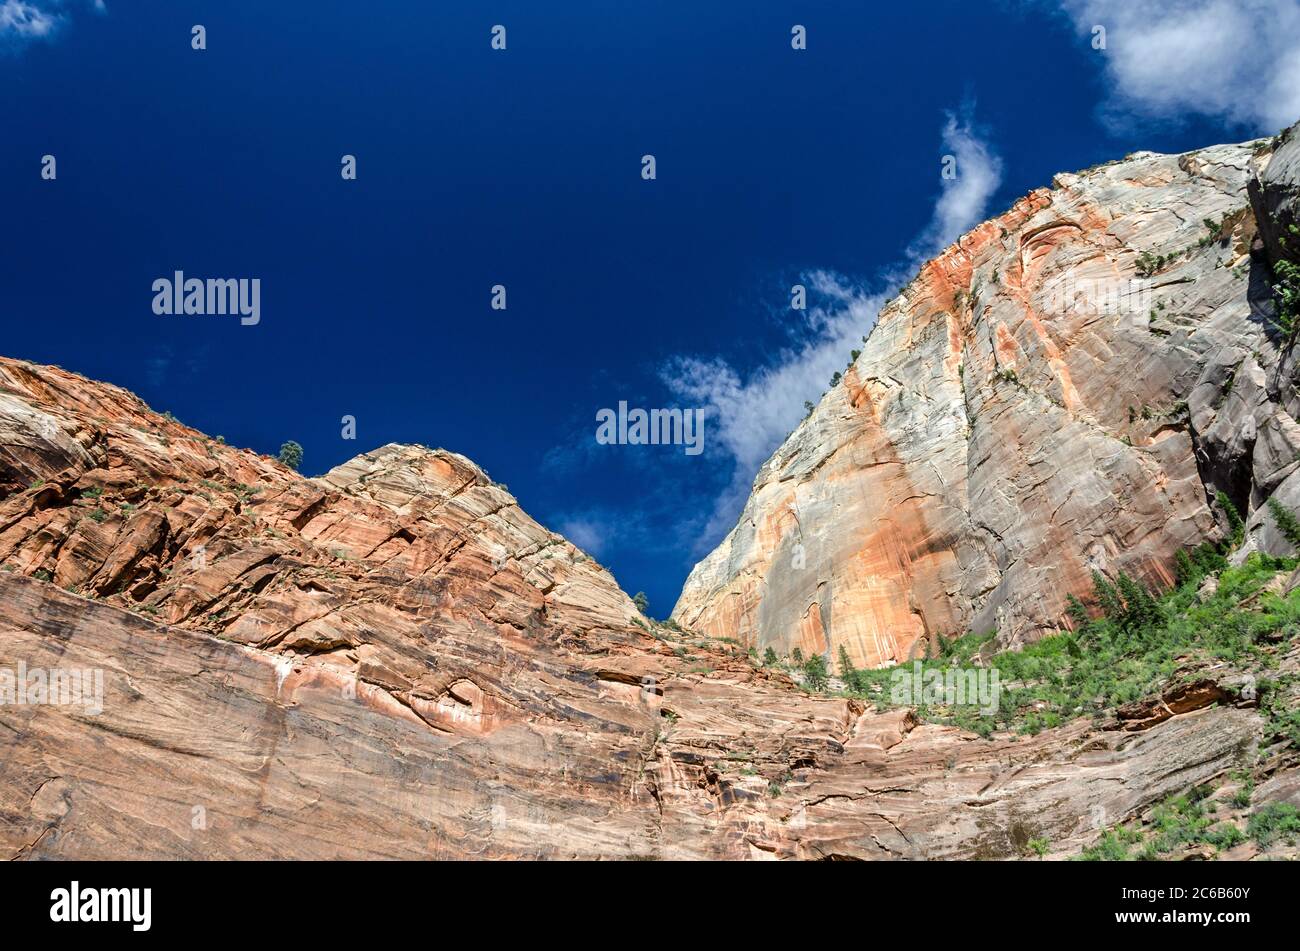 Scenic red mountain cliff in the desert Stock Photo